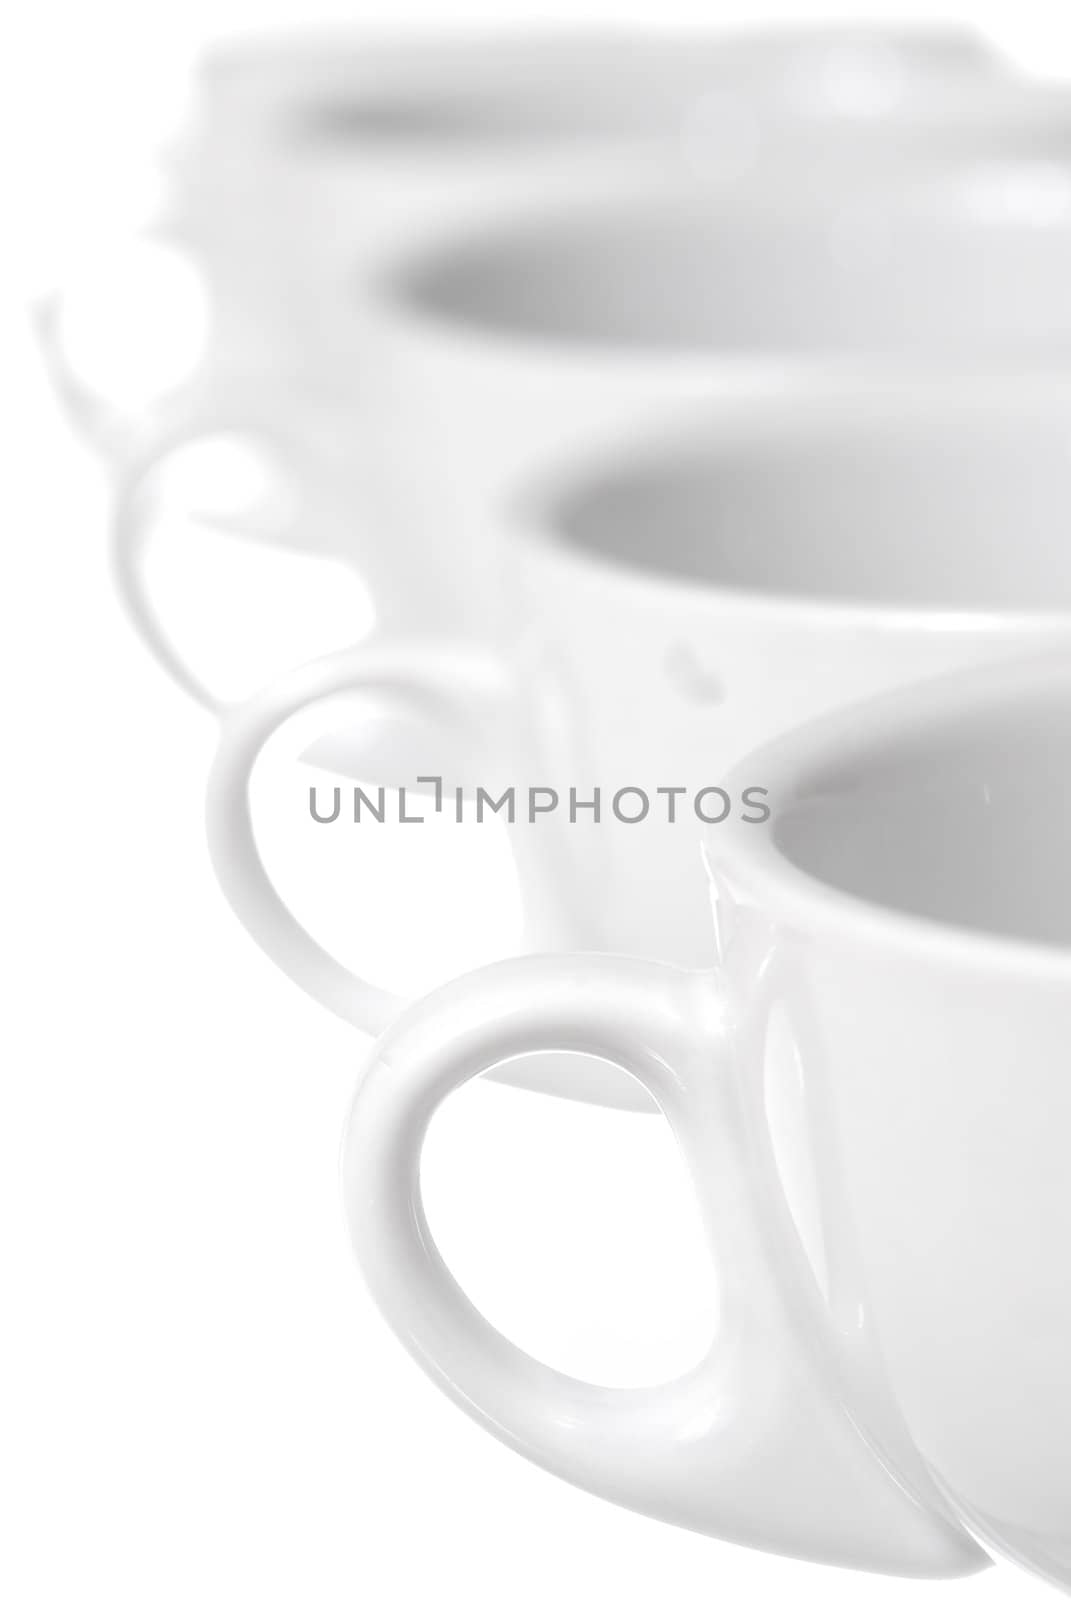 Row of coffee cups. Focus on 1st Cup. Copy Space.